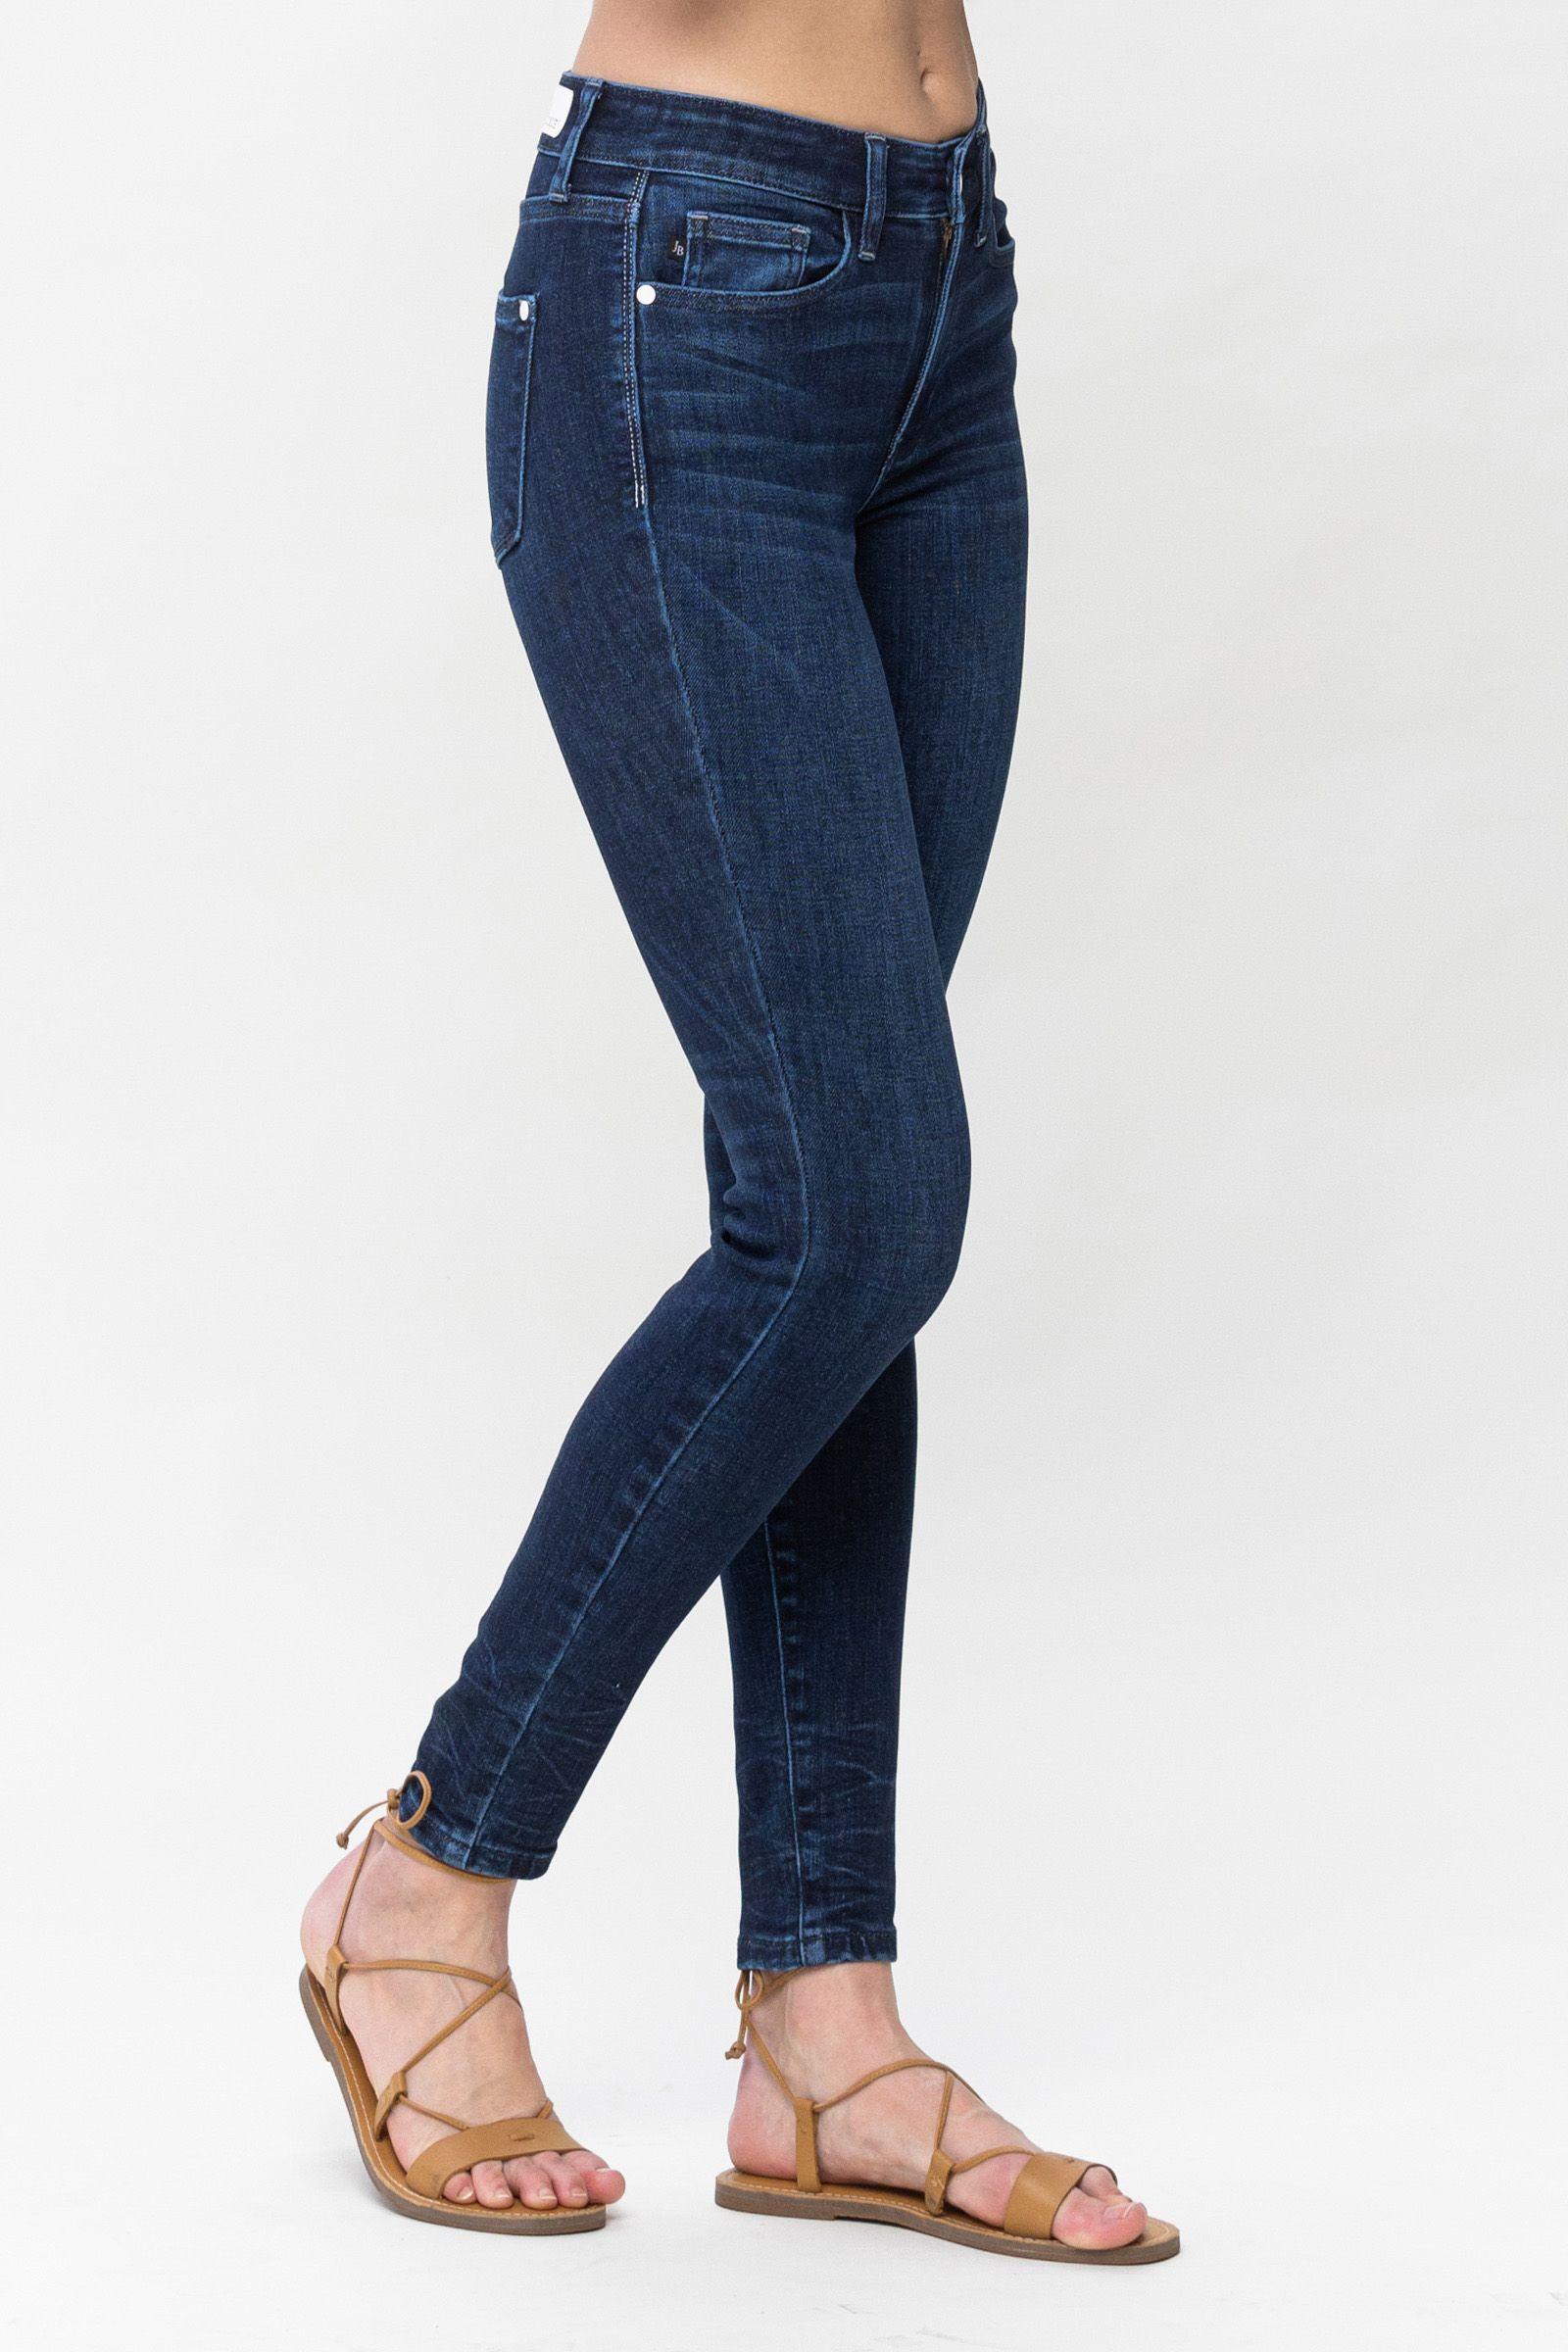 Judy Blue Jeans- Open Ankle Stitch Medium Blue – The Silver